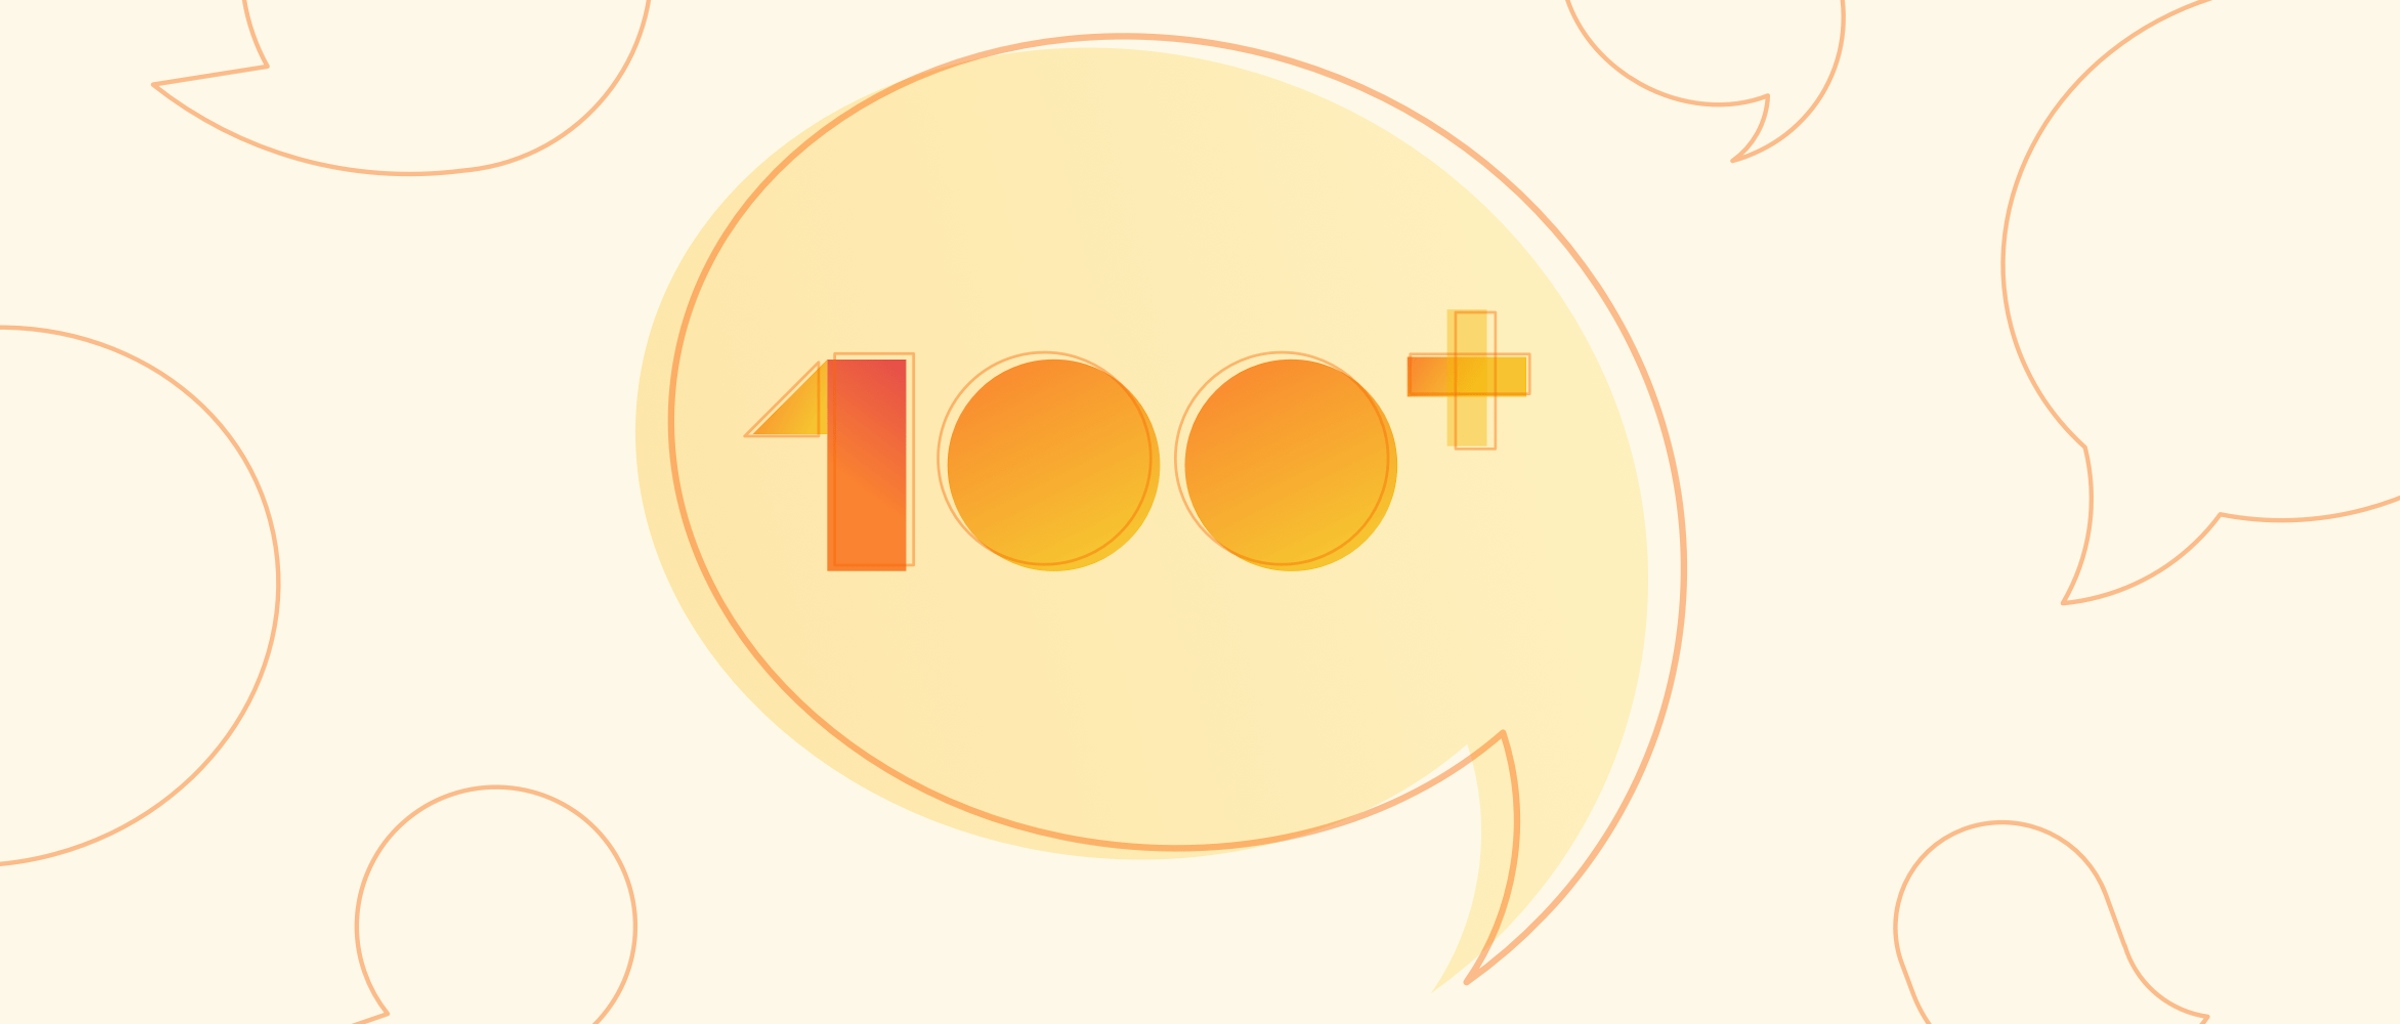 A header image showing an illustrated speech bubble with the text 100+ inside